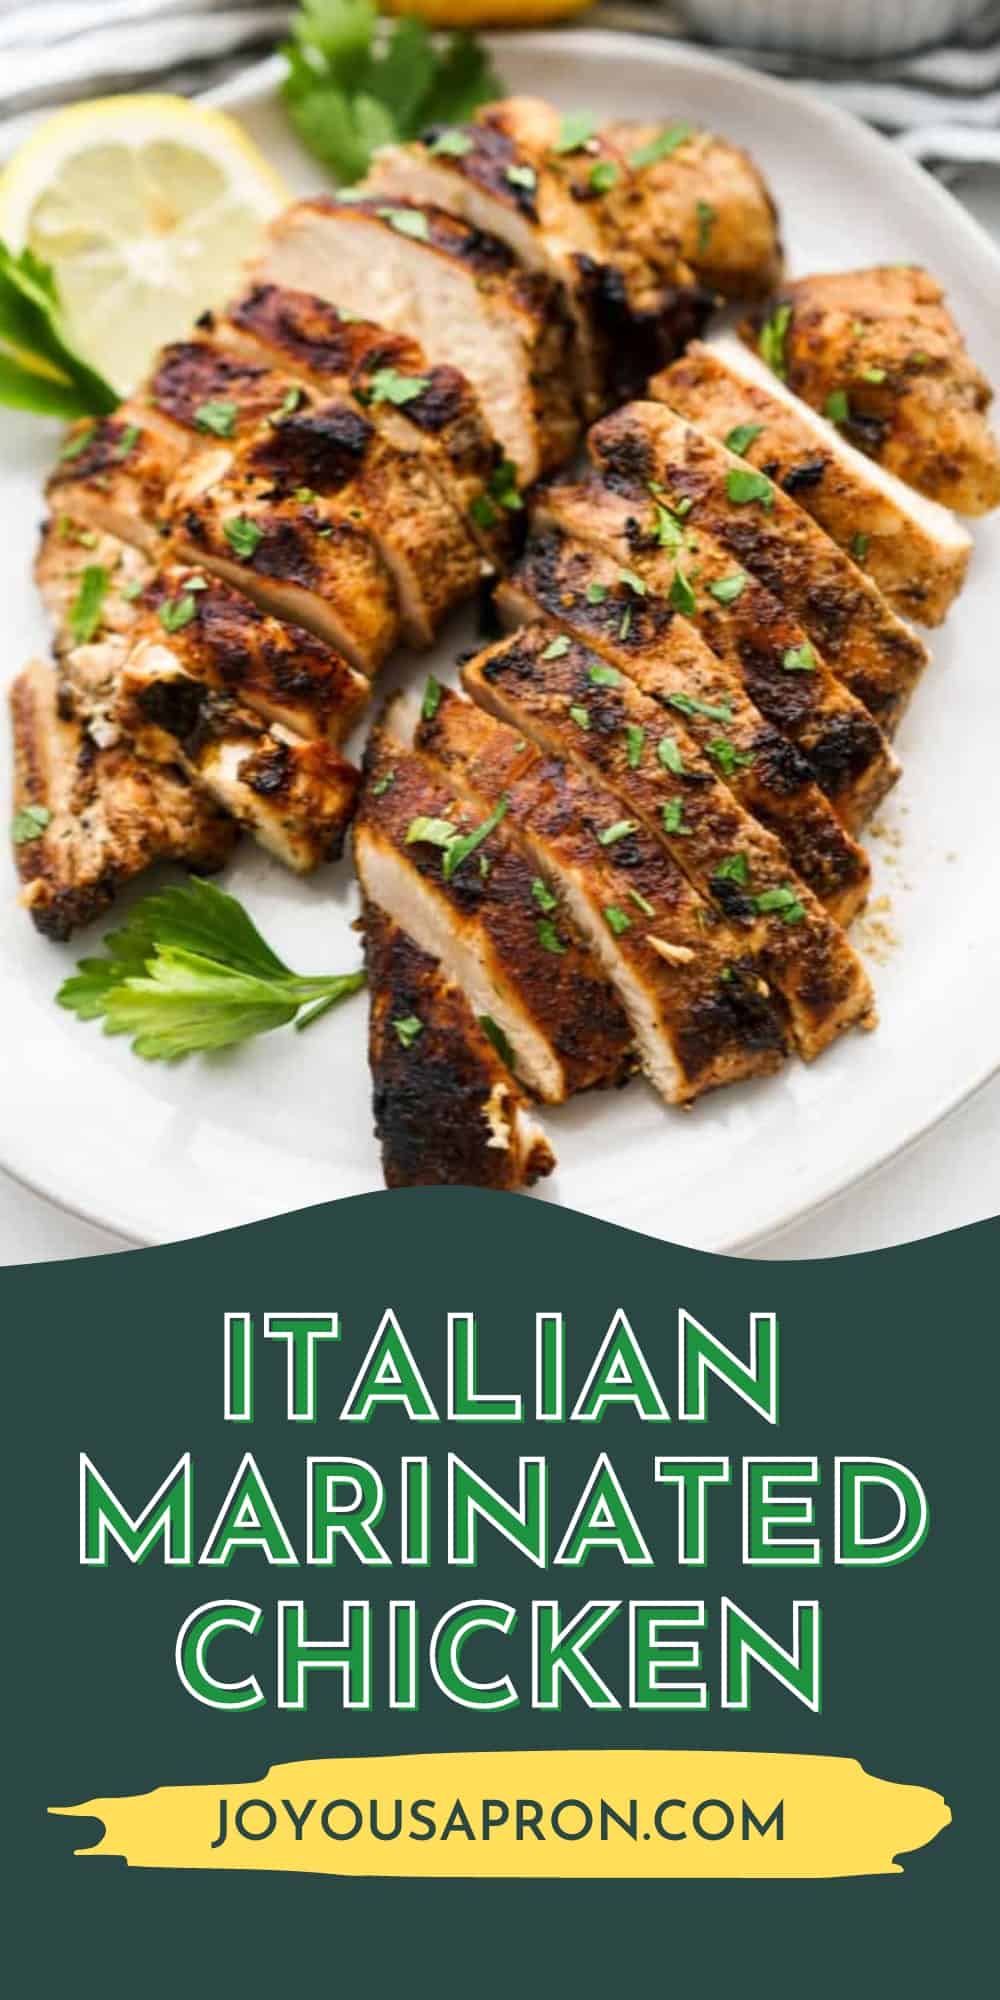 Italian Grilled Chicken - easy and flavorful Italian marinated chicken recipe, perfect for summer cookouts and grilling! Chicken breast is marinated in an Italian marinade which consists of Italian inspired seasonings and spices. Juicy, moist and very flavorful! via @joyousapron